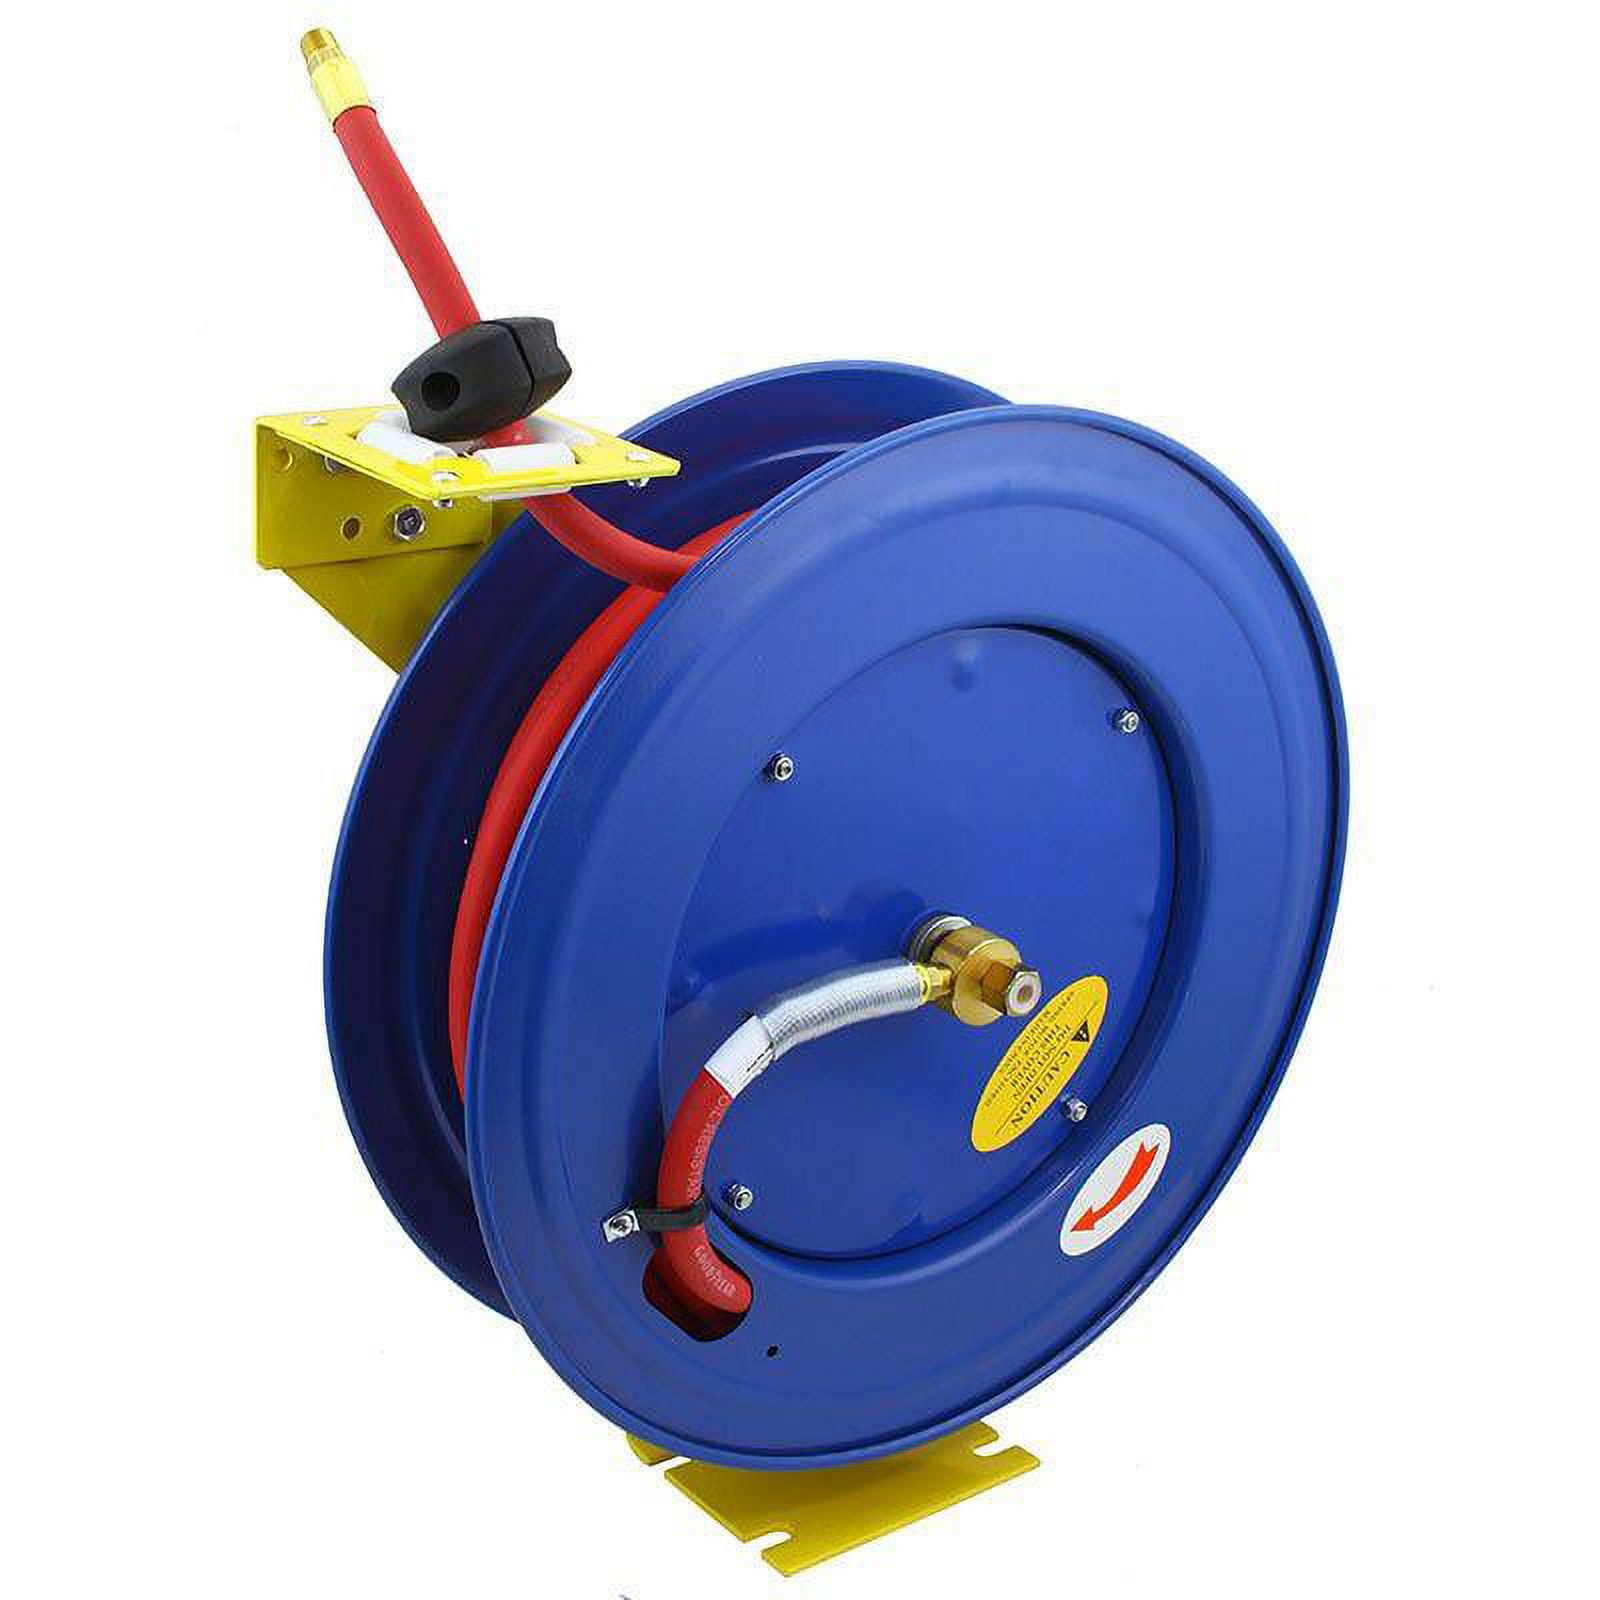 100 Foot Automatic Air Hose Reel, Size: 8 in